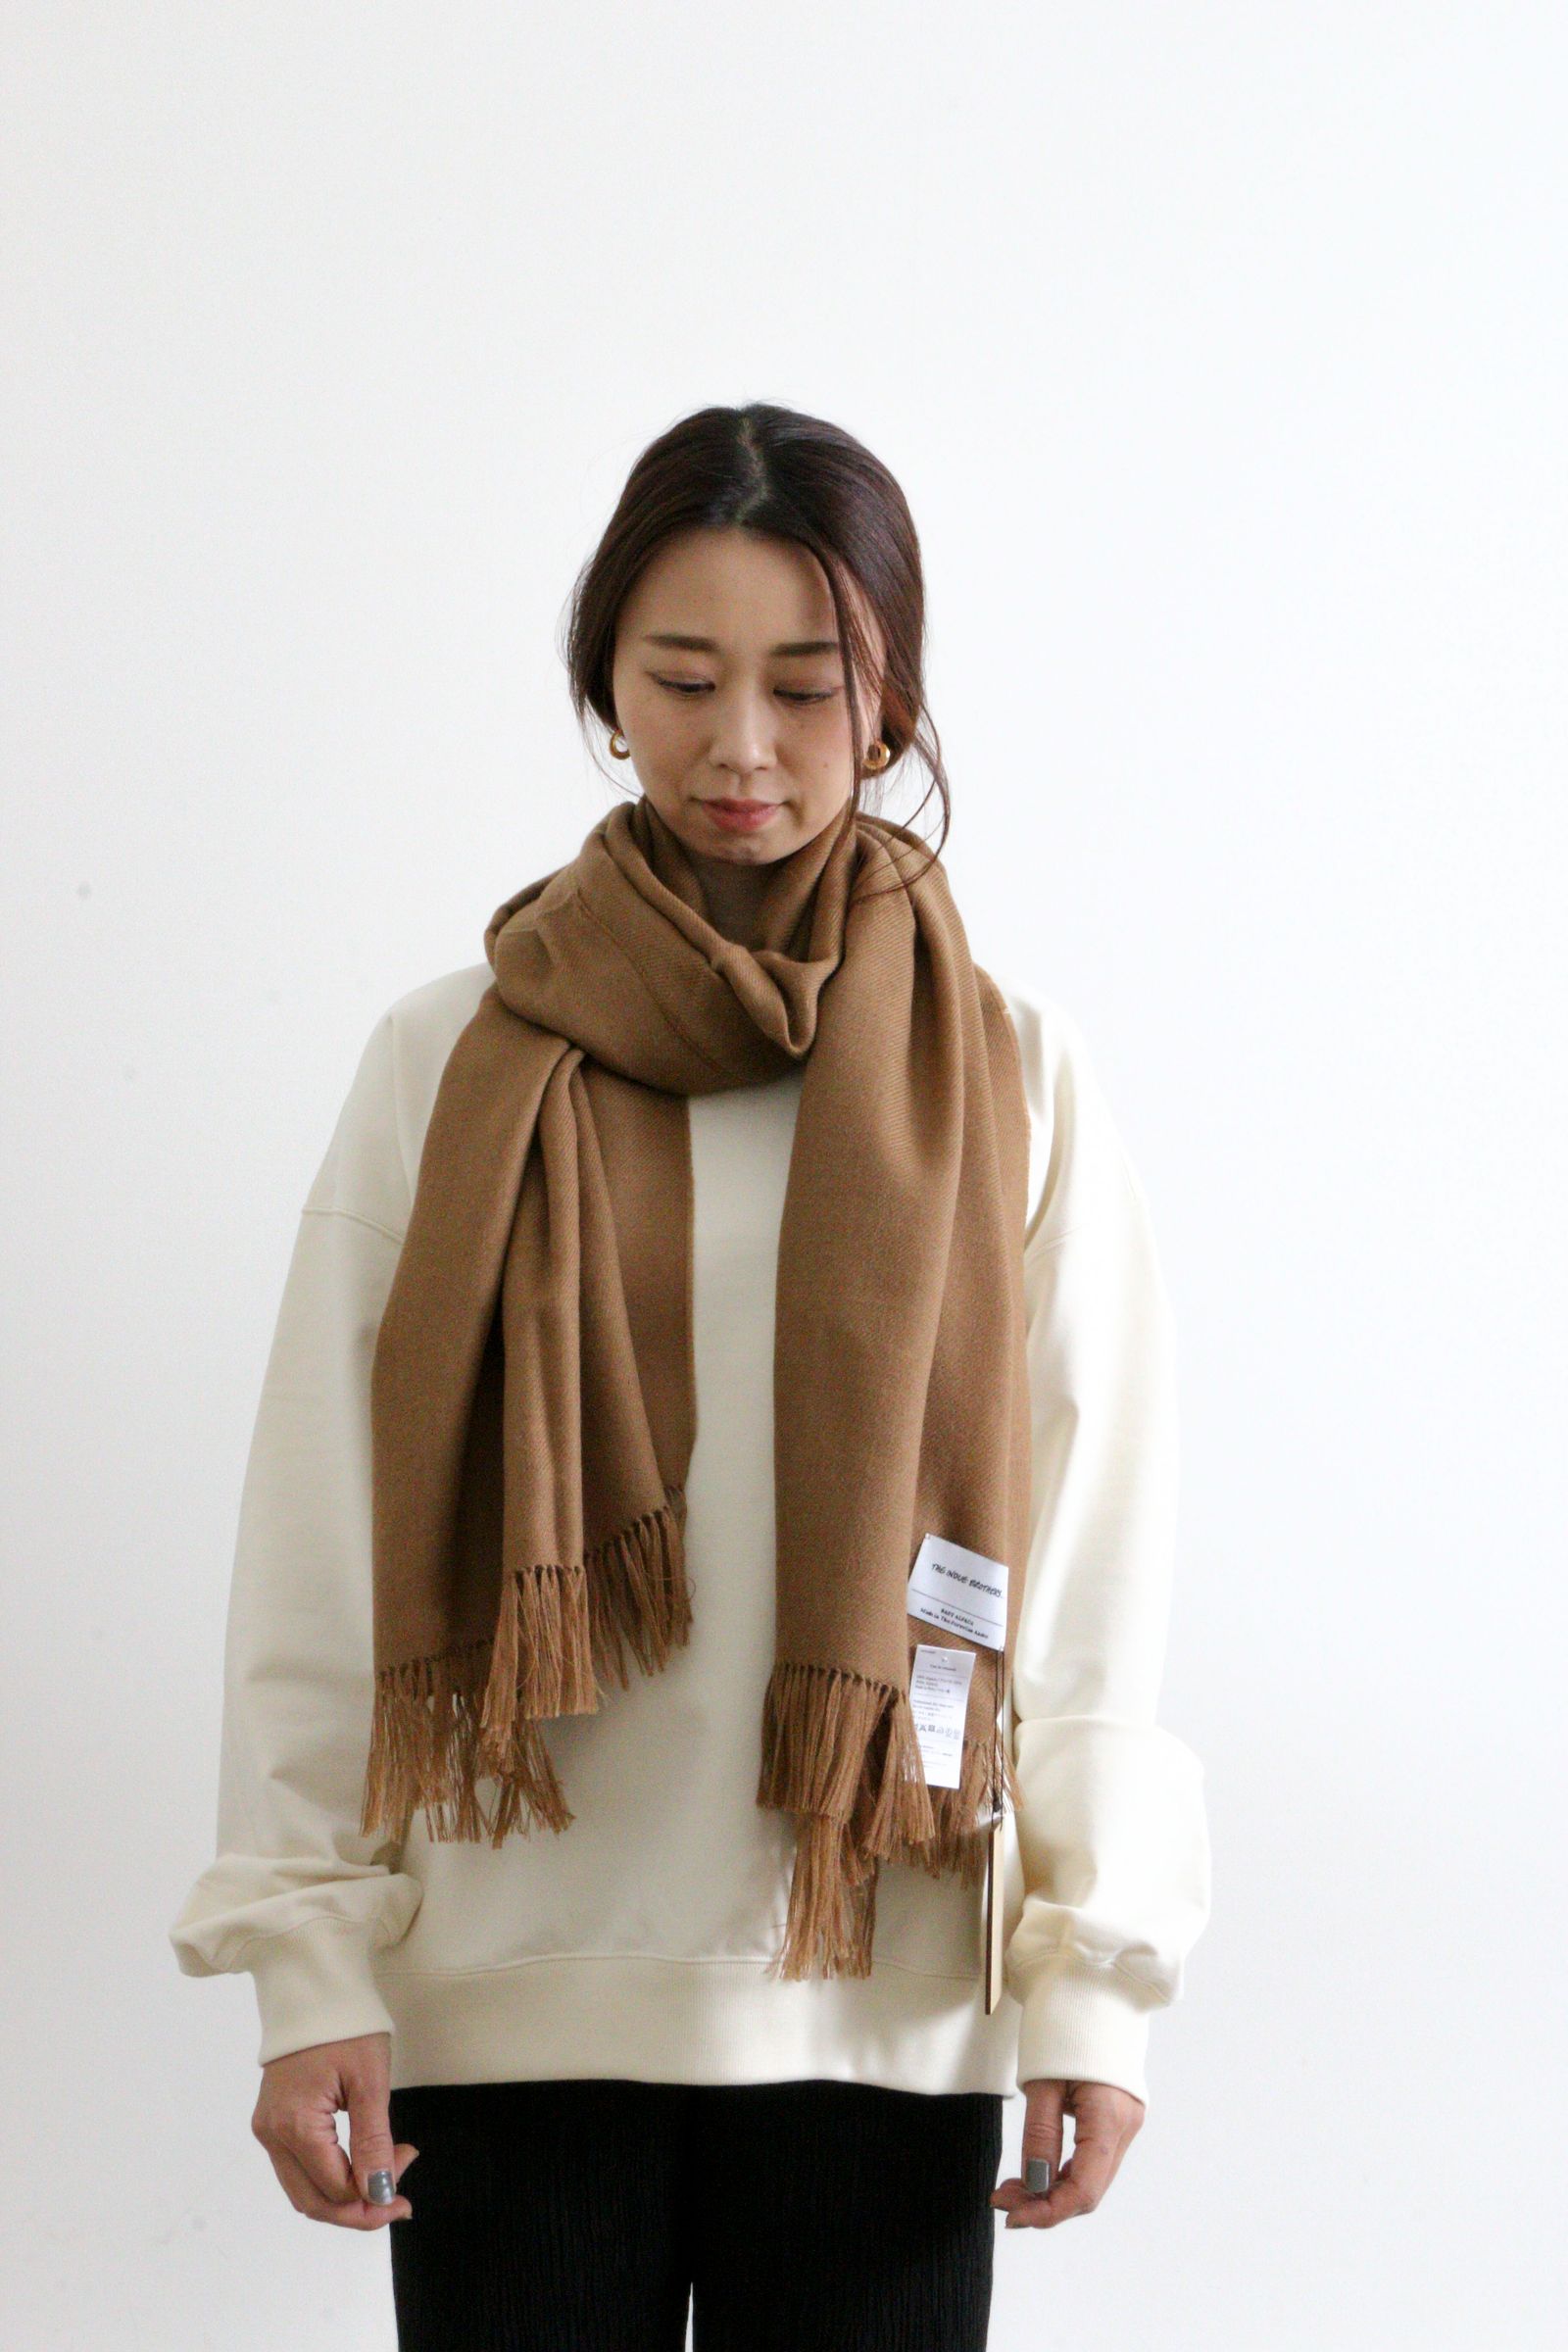 THE INOUE BROTHERS - Non Brushed Large Stole Camel / 大判 